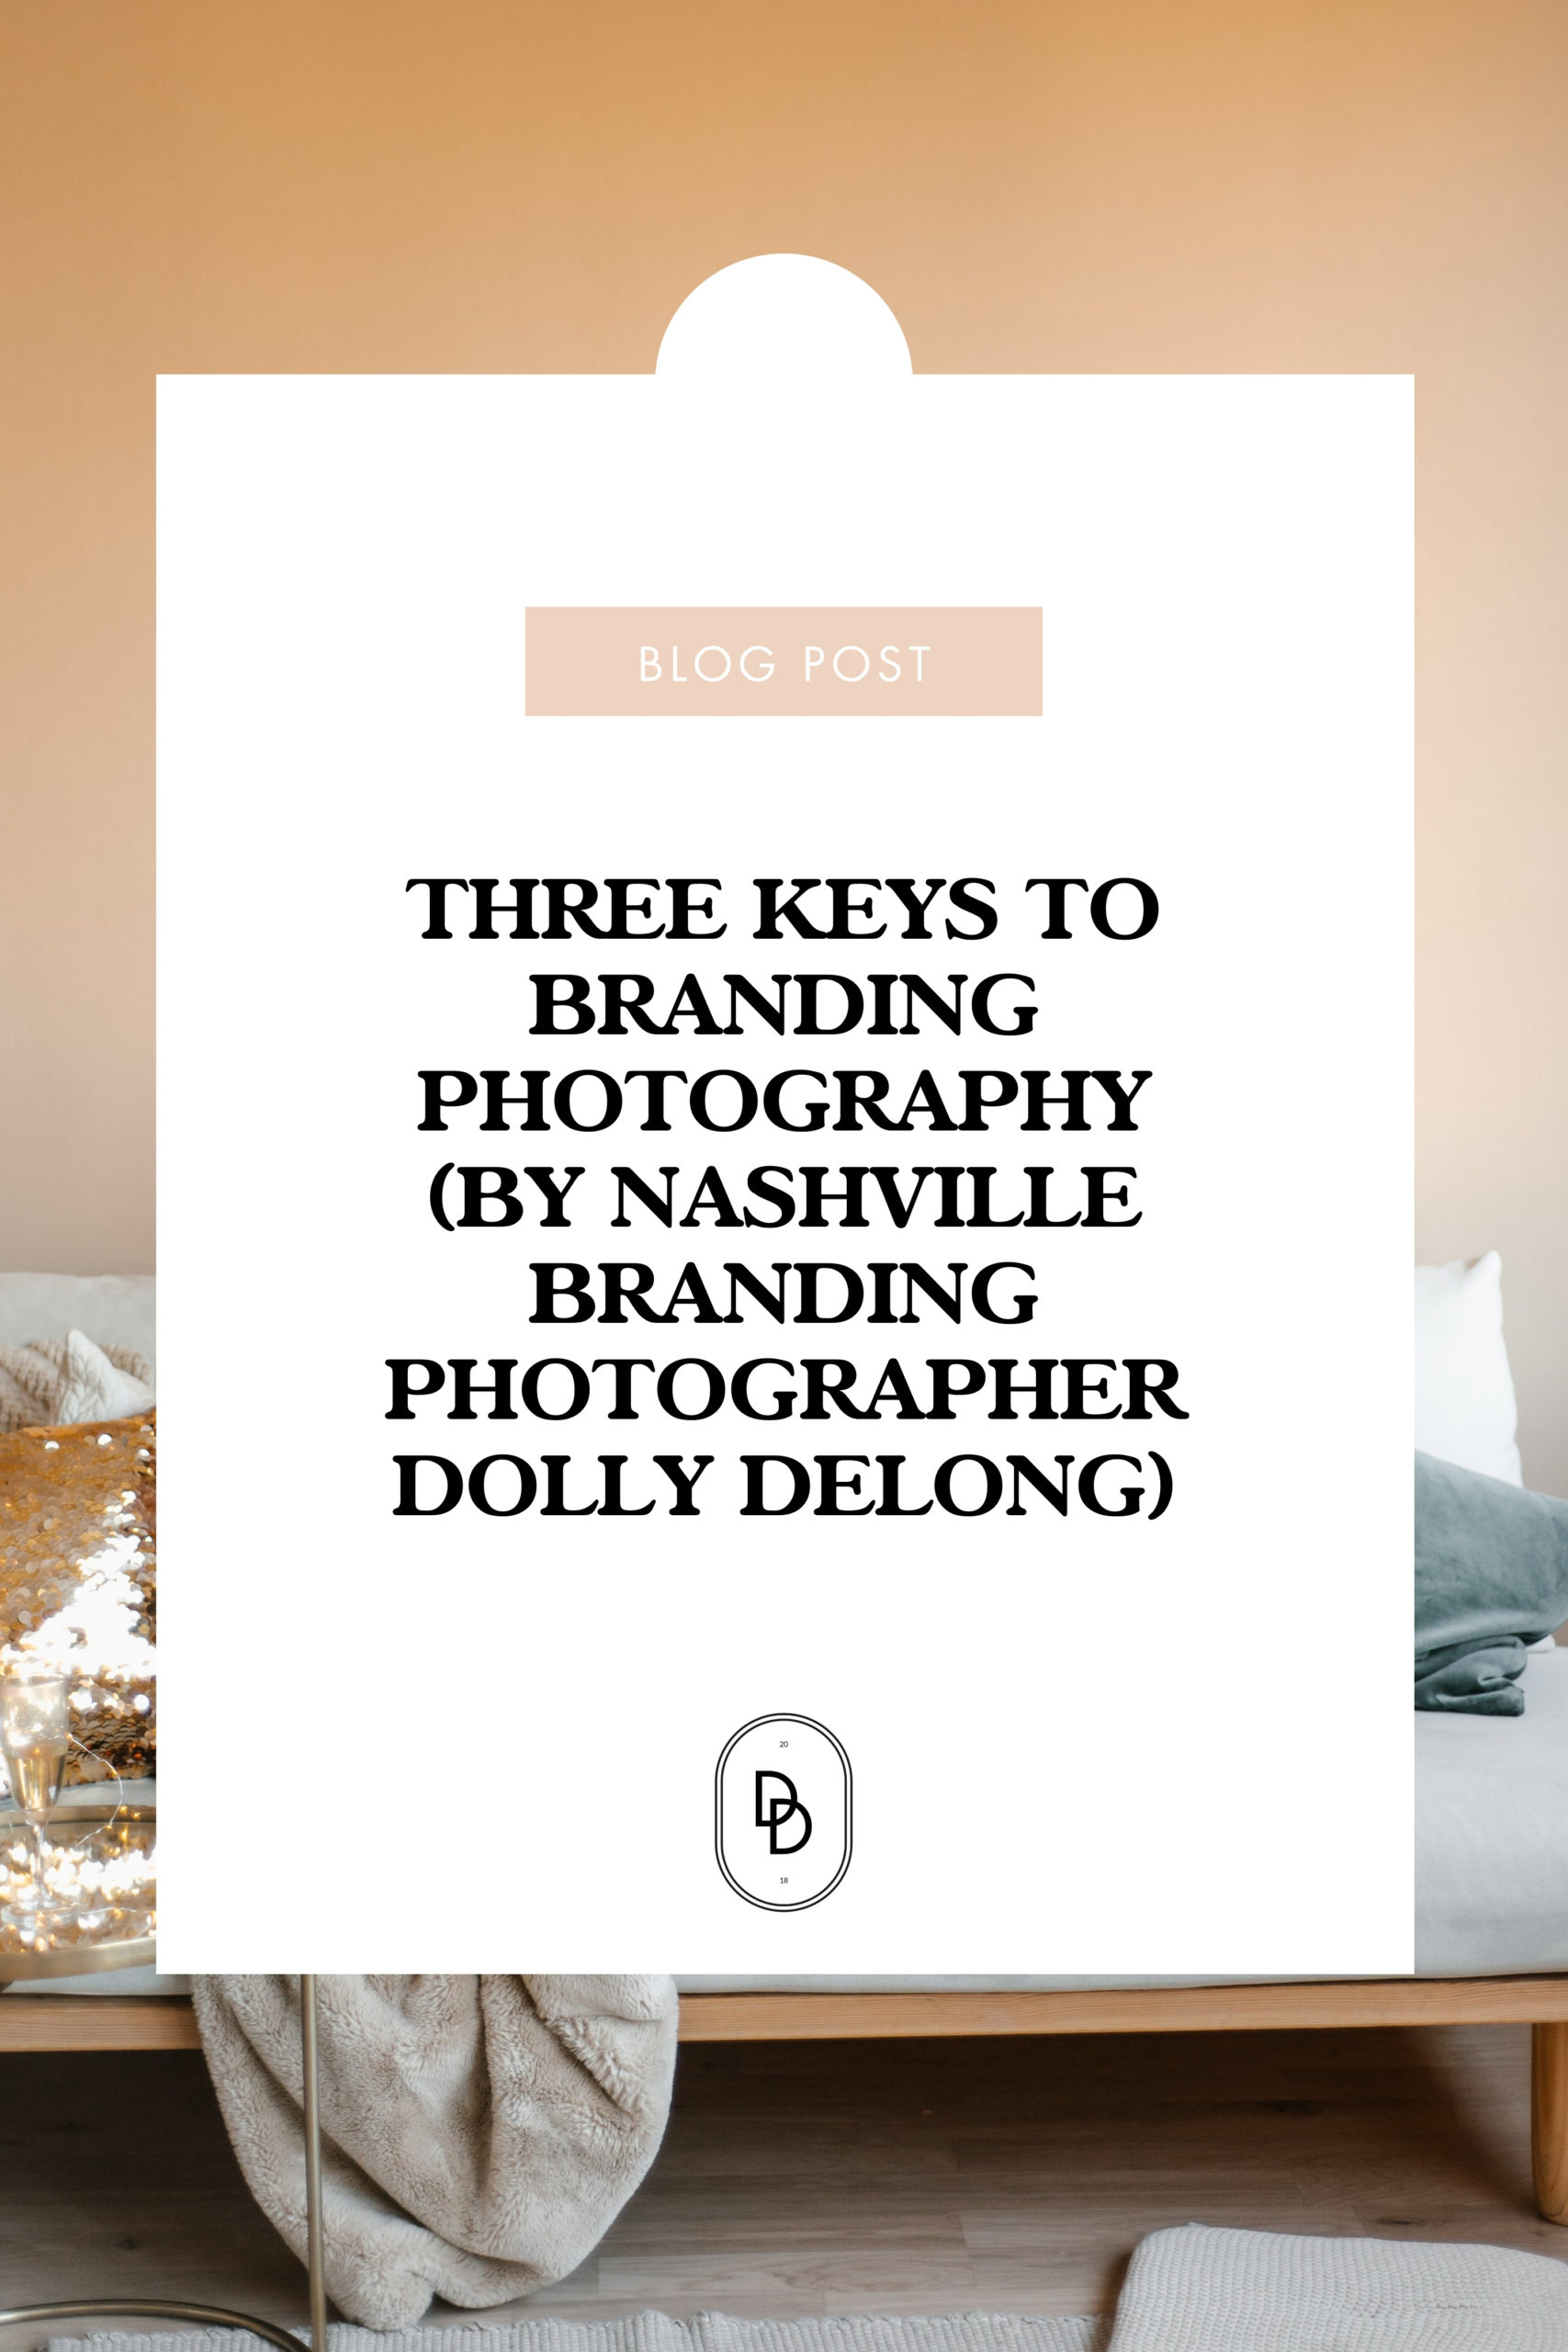 Three Keys to Branding Photography by Nashville Branding Photographer Dolly DeLong Photography a Pinterest Image Text Only